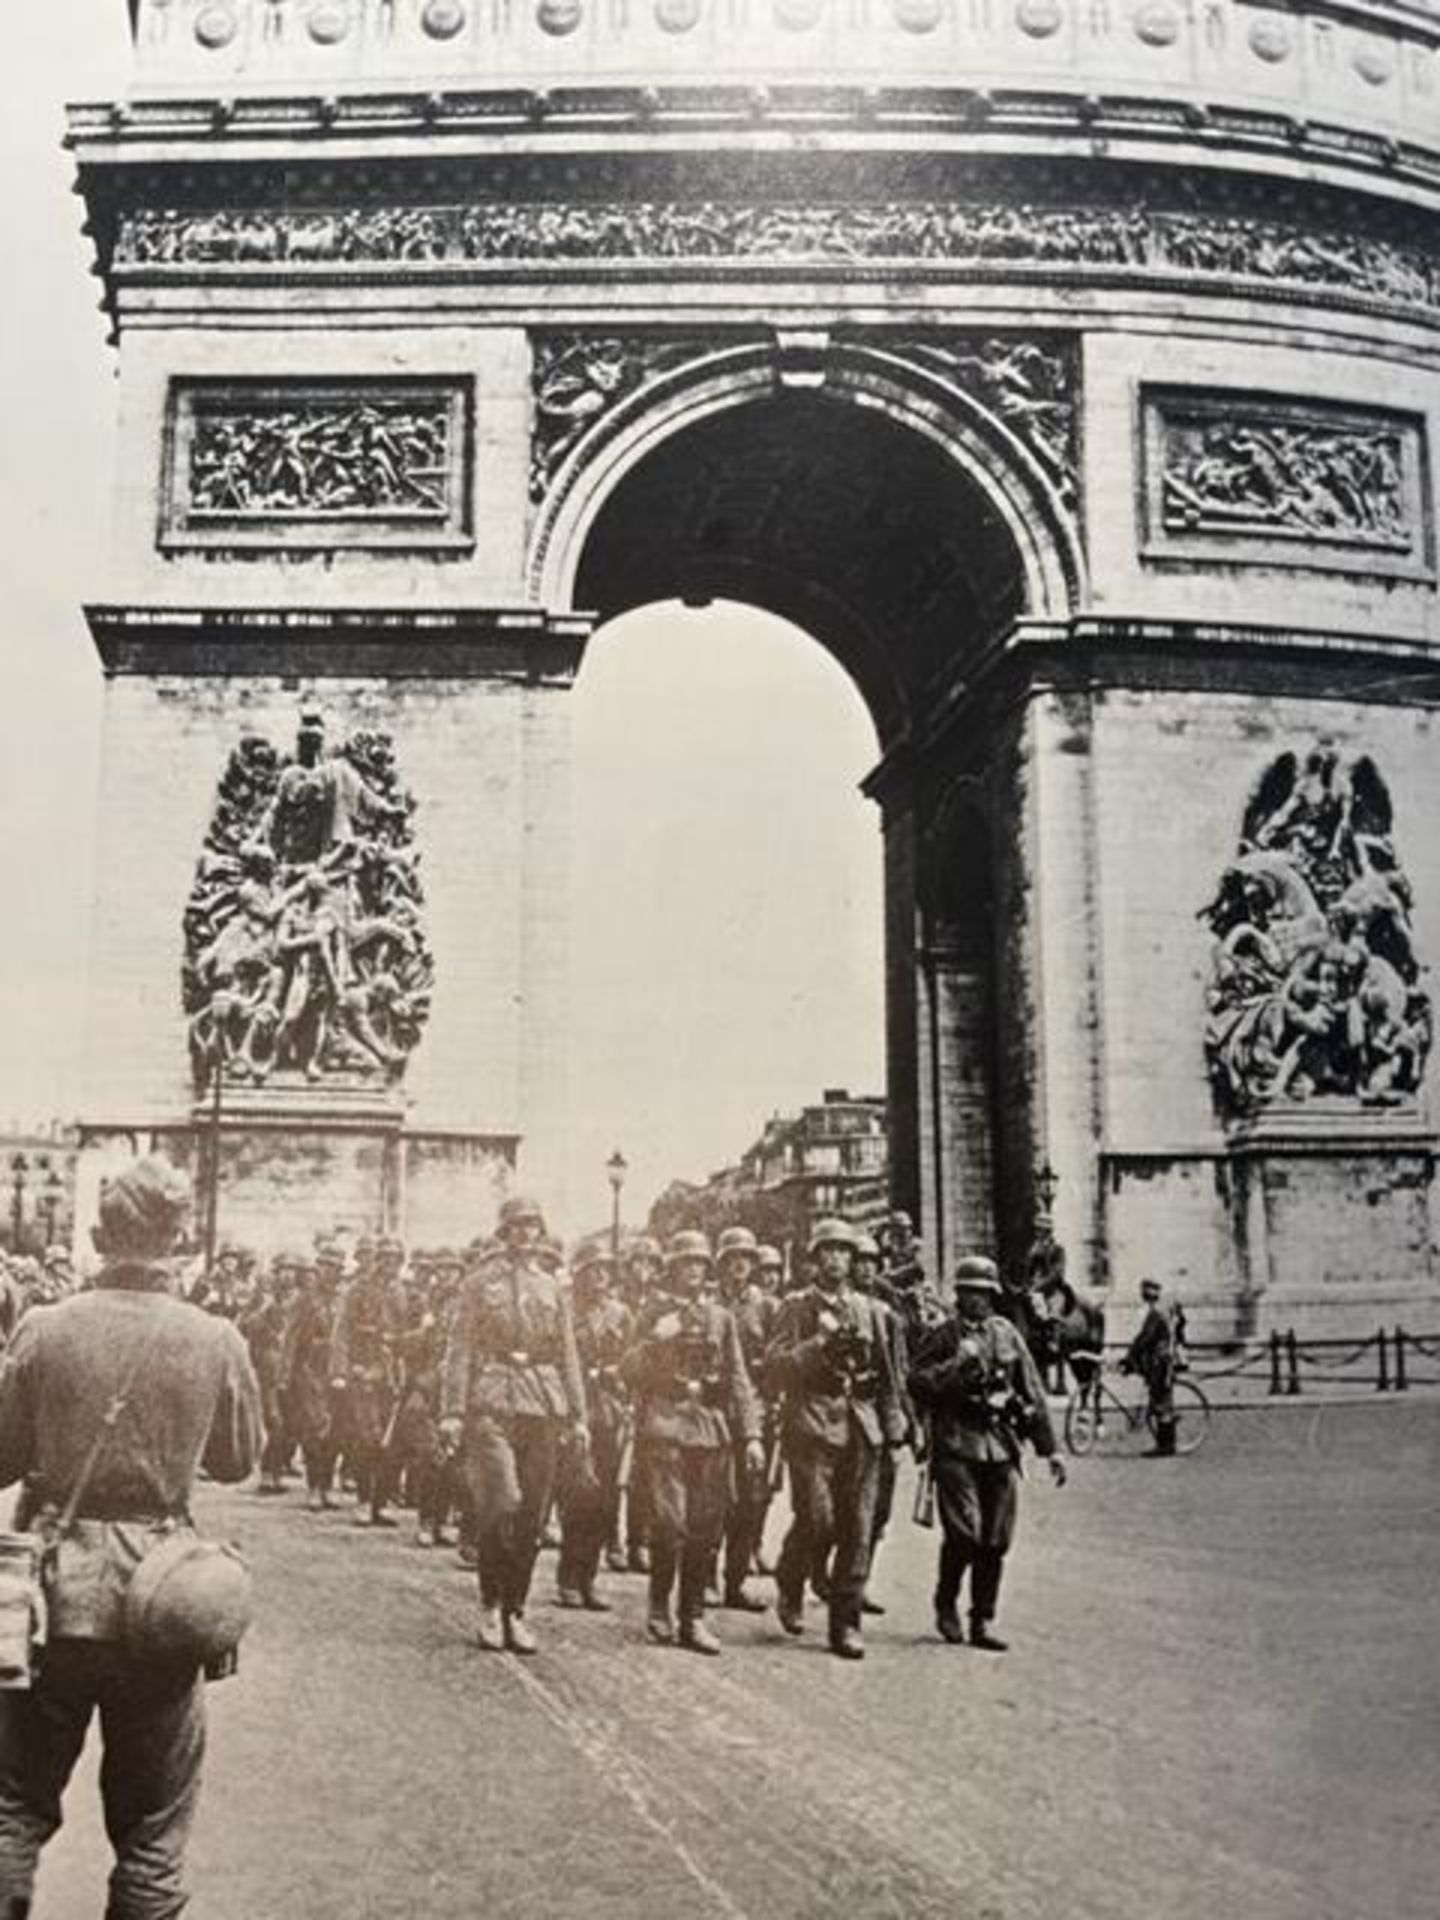 William Shirer "German troops in Arc de Triomphe" Print.